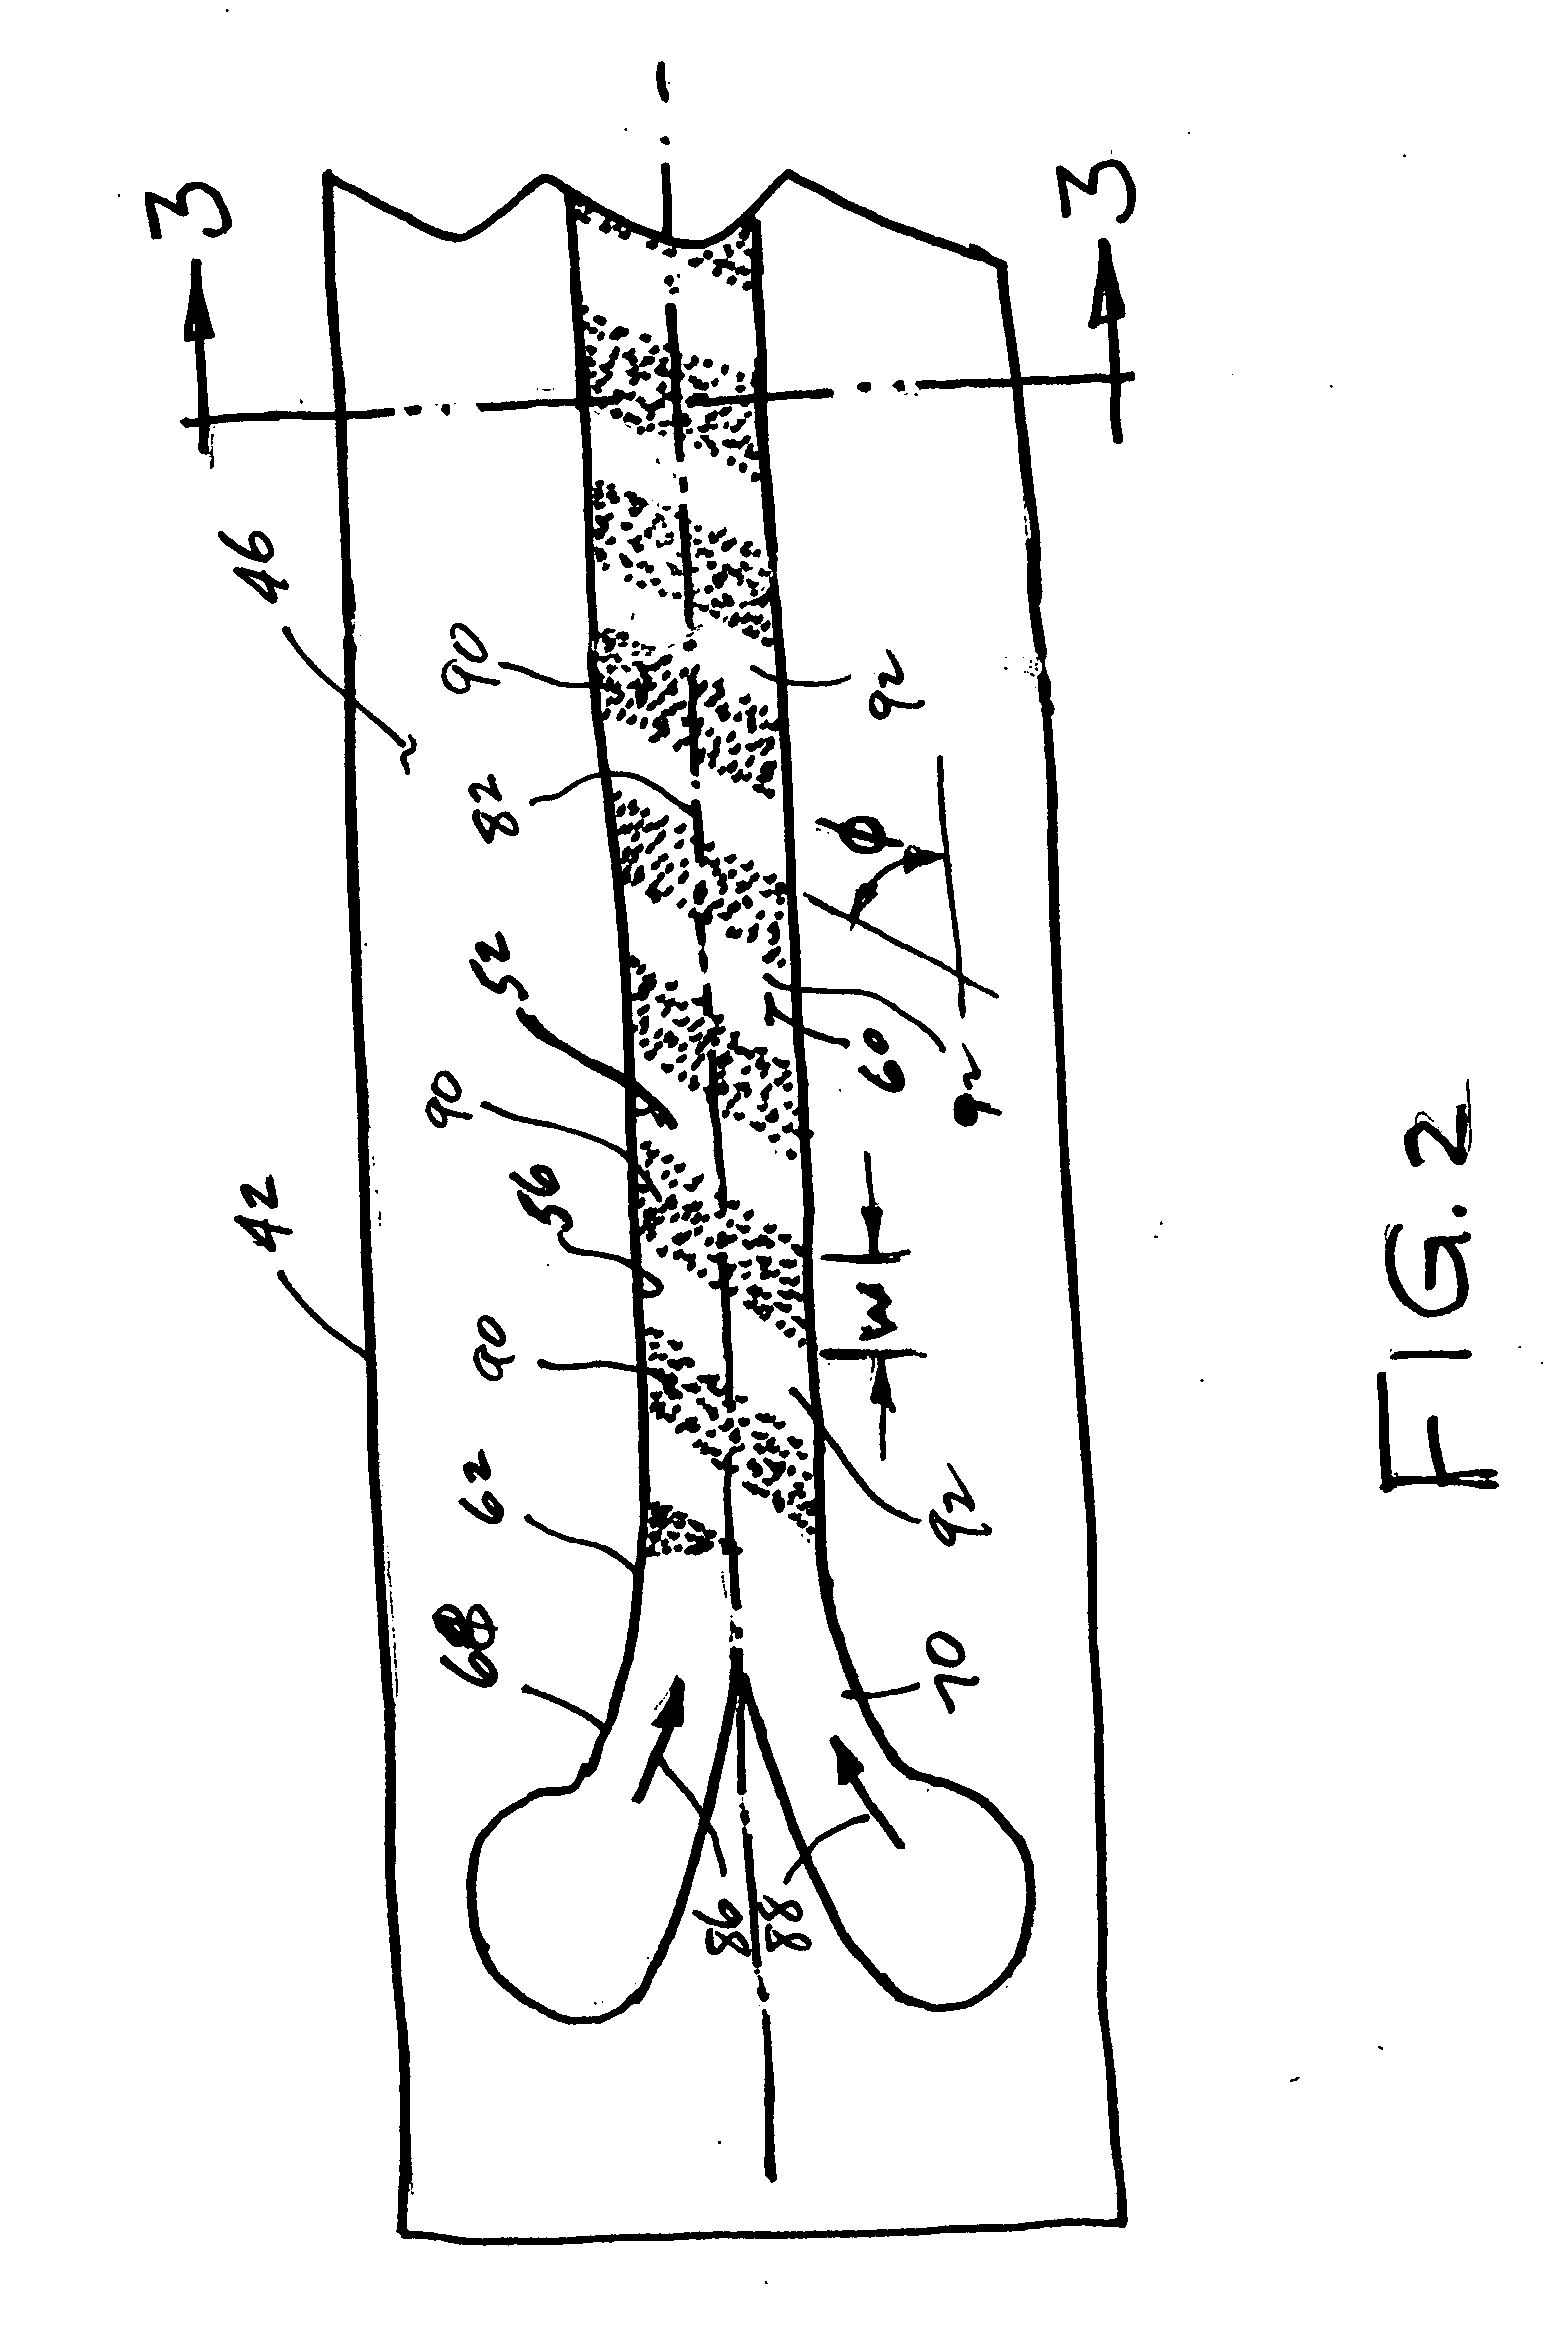 Fluidic mixing structure, method for fabricating same, and mixing method